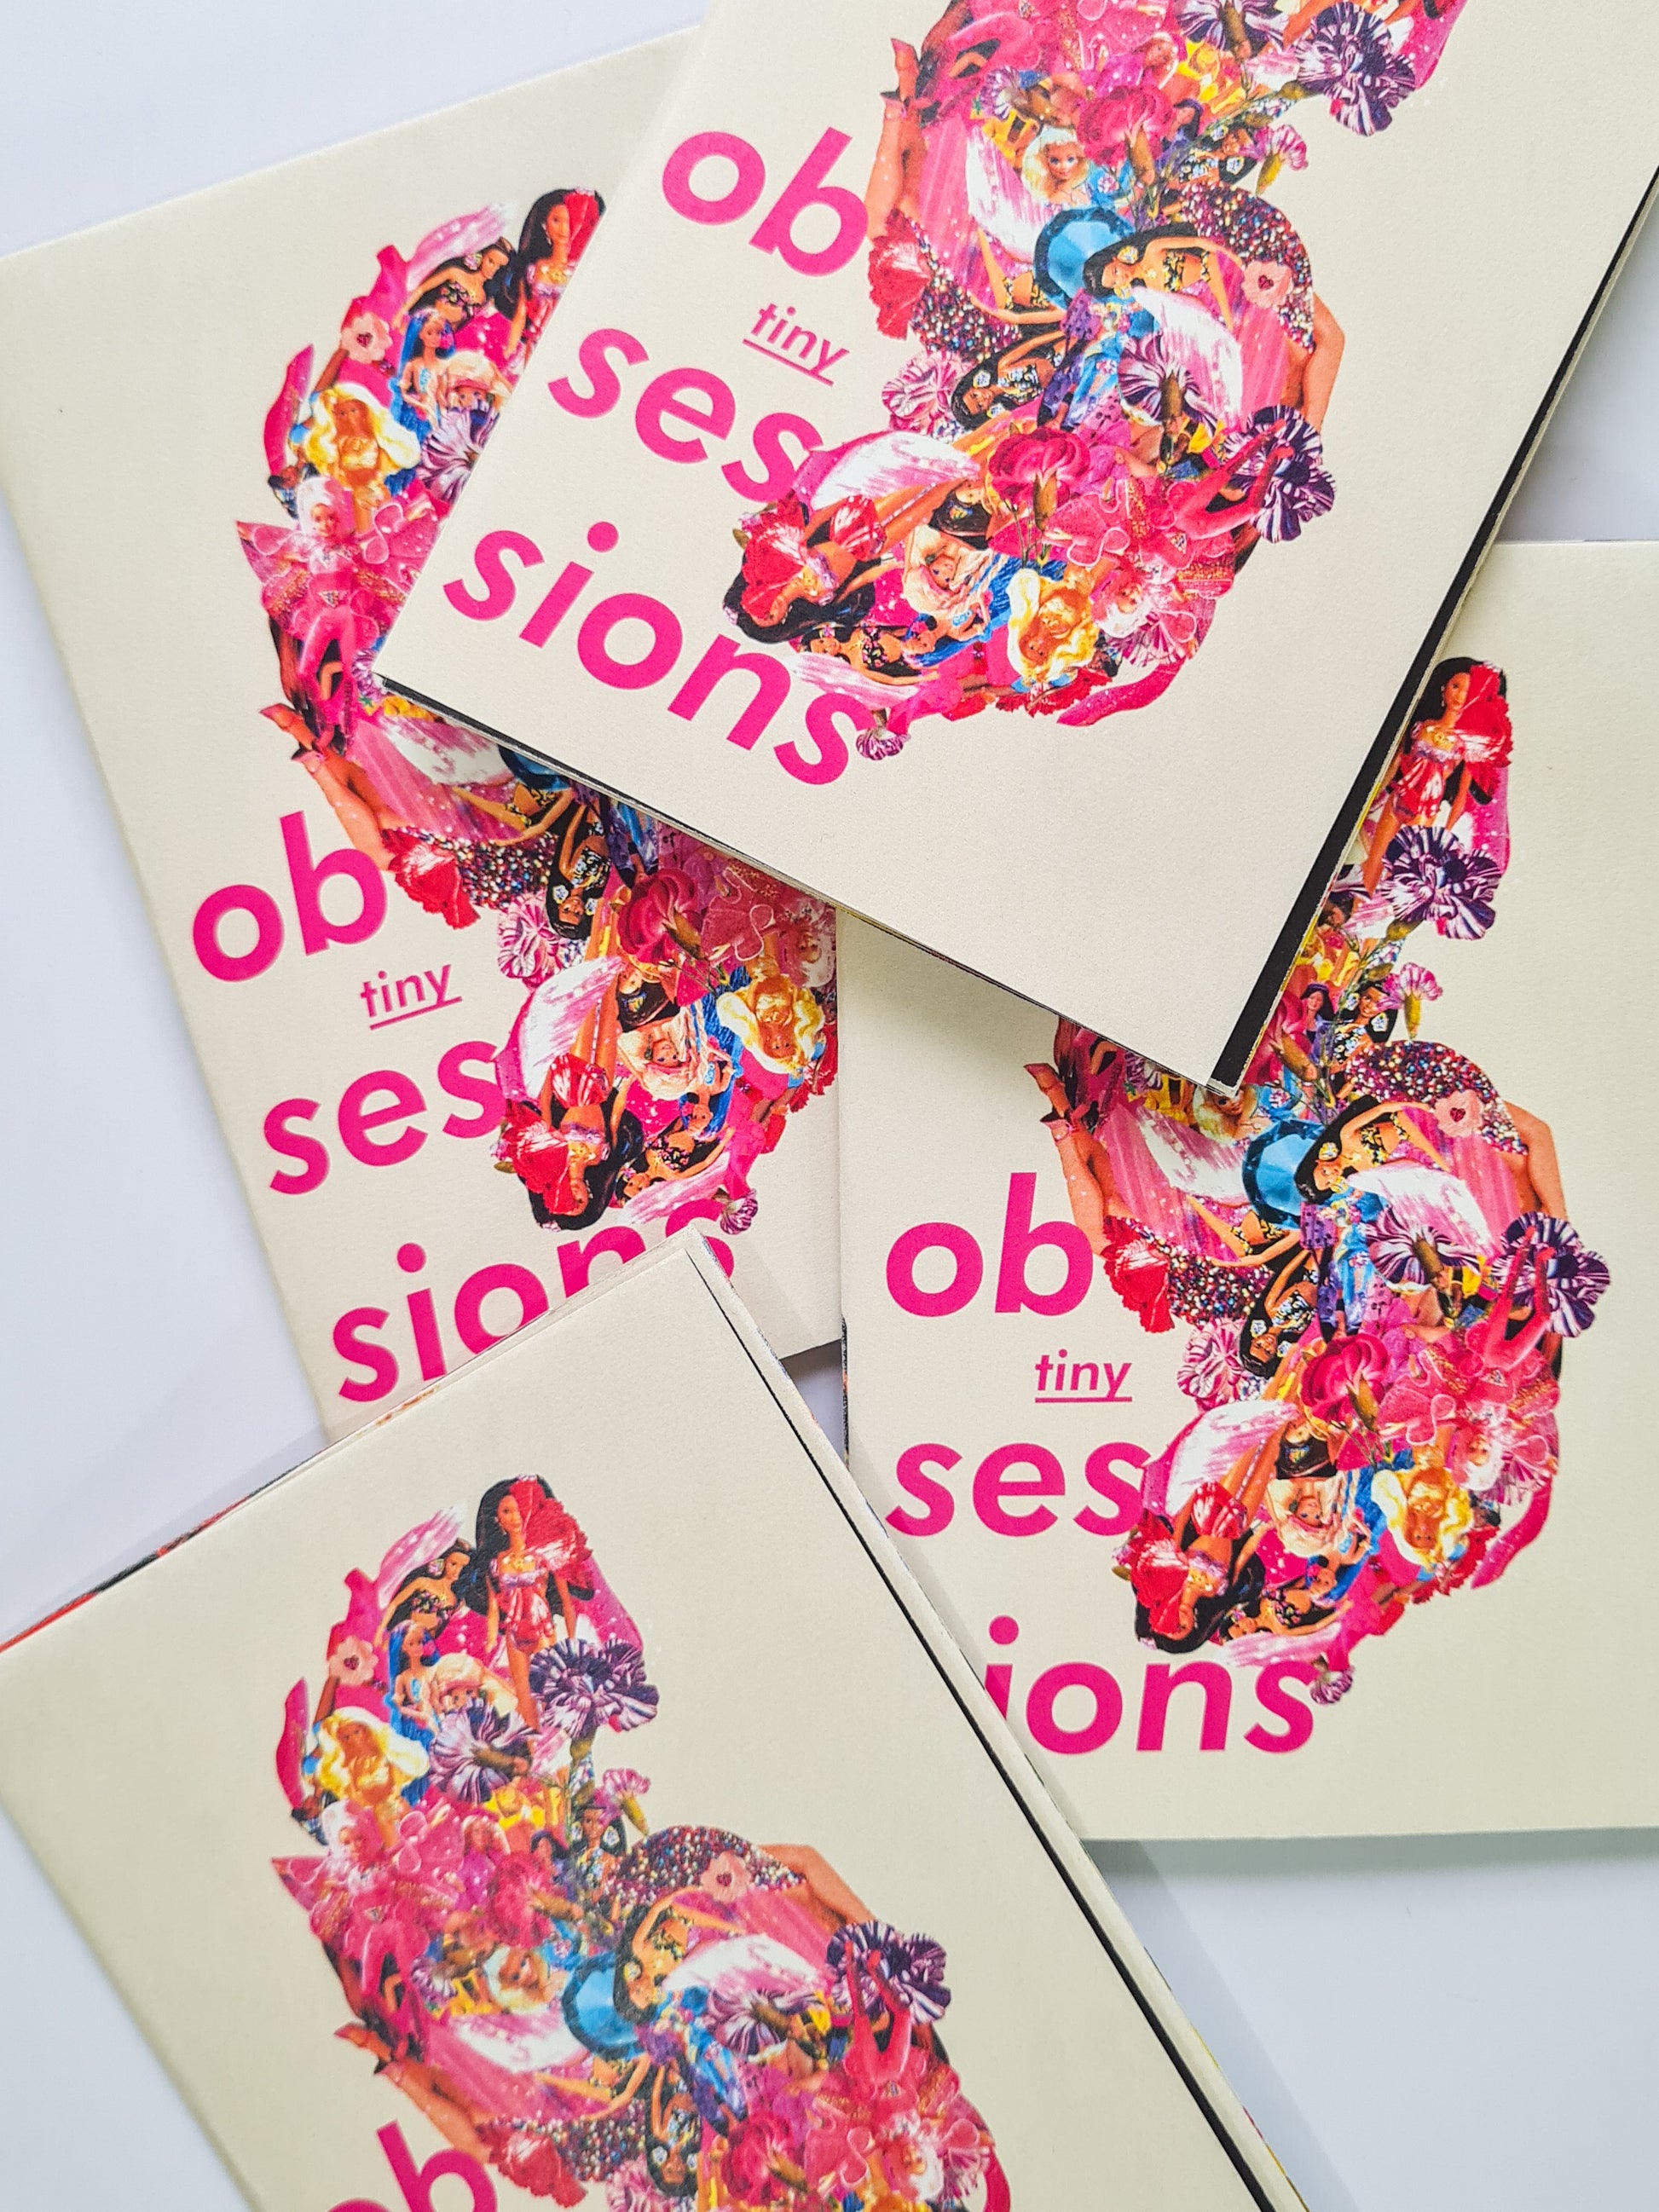 'TINY OBSESSIONS' collage zine - Woman Create